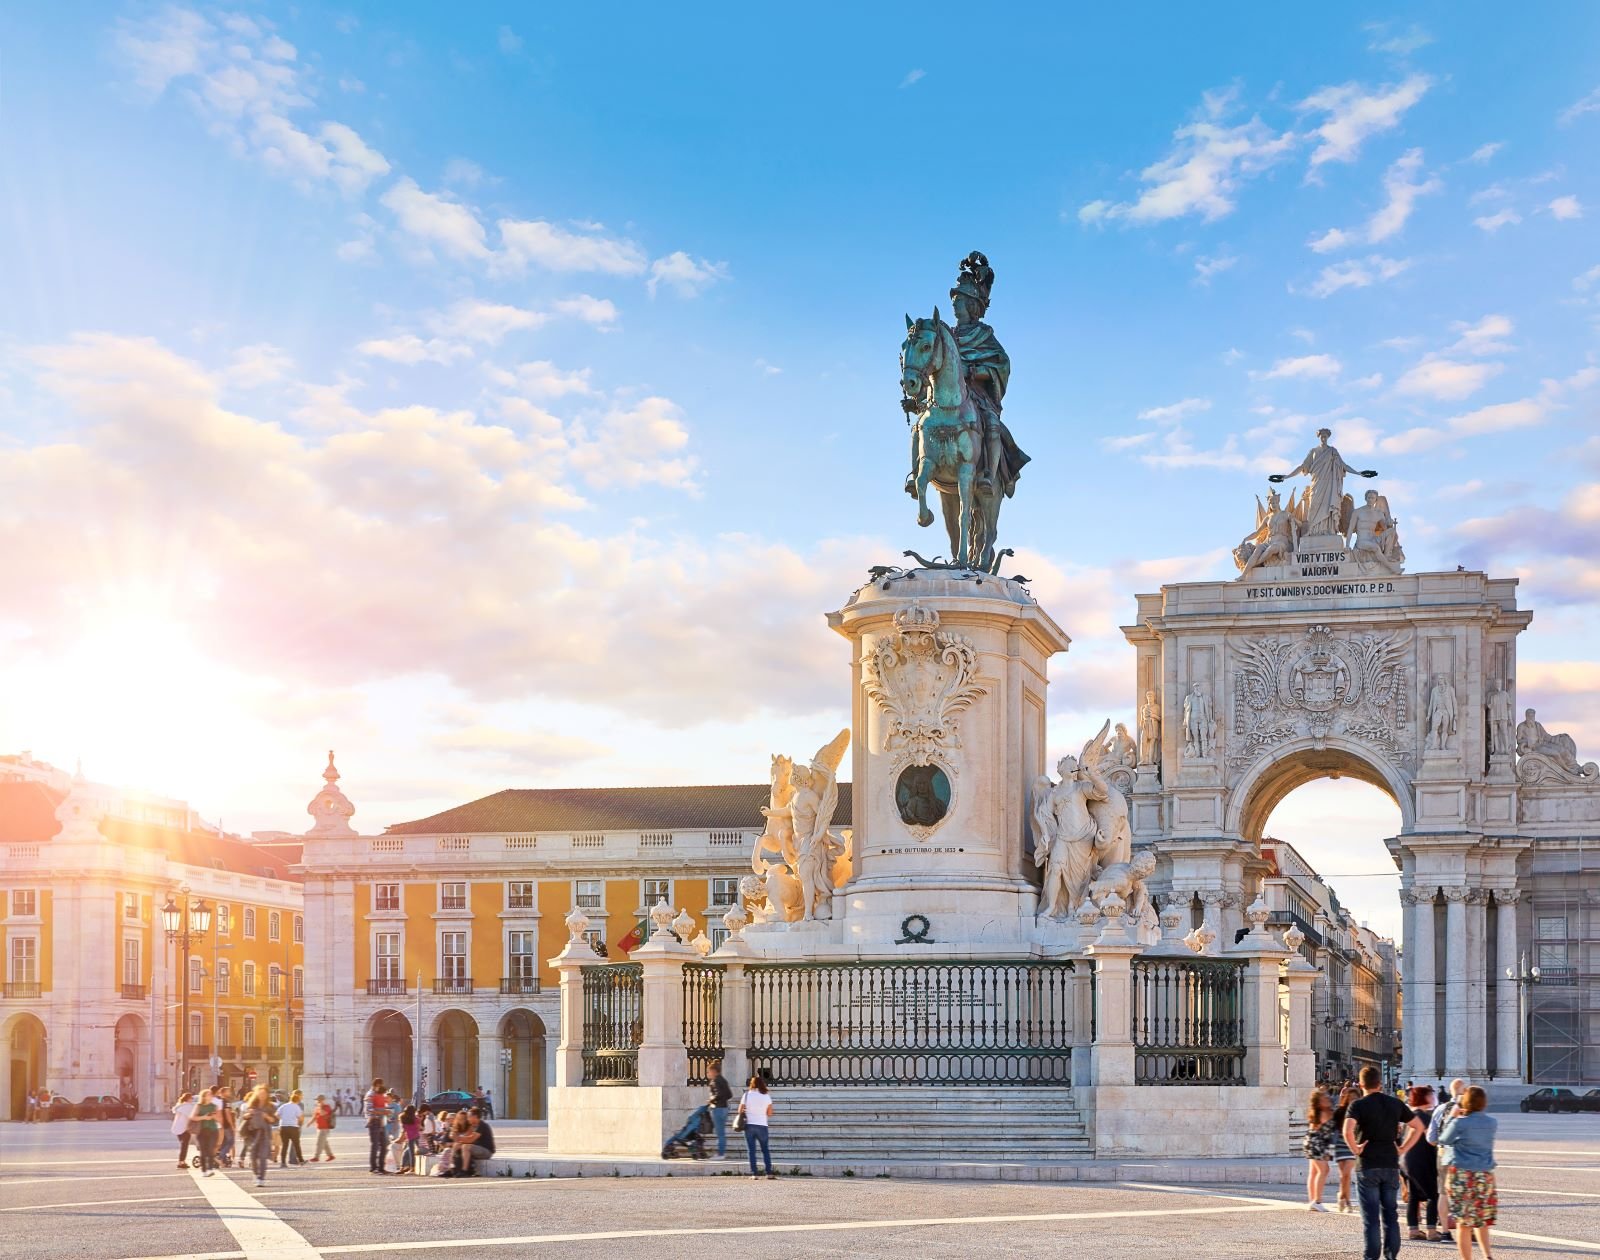 <p>Portugal is the <a href="https://livingcost.org/cost/portugal" rel="noopener">cheapest country to live in Western Europe</a>. Portugal is relatively more affordable than other European cities and is gaining popularity with retirees as long as one does not plan to settle in Lisbon. Opt for cities like Leiria, Aveiro, and Portimão that offer warm climates, friendly people, buzzing cafes and restaurants, and a high level of safety.</p>